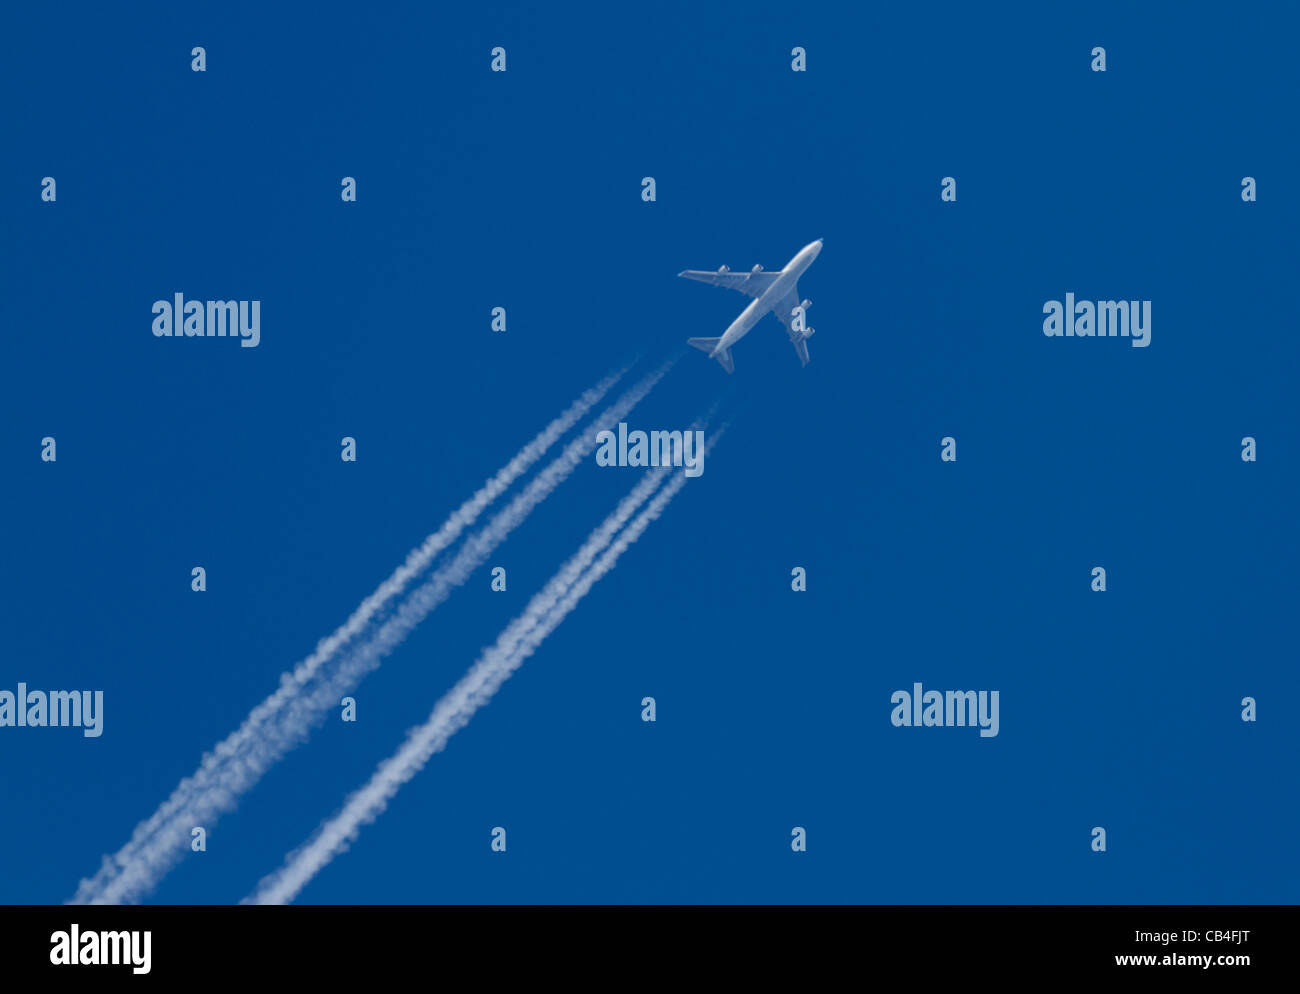 Aircraft with condensation trail Stock Photo